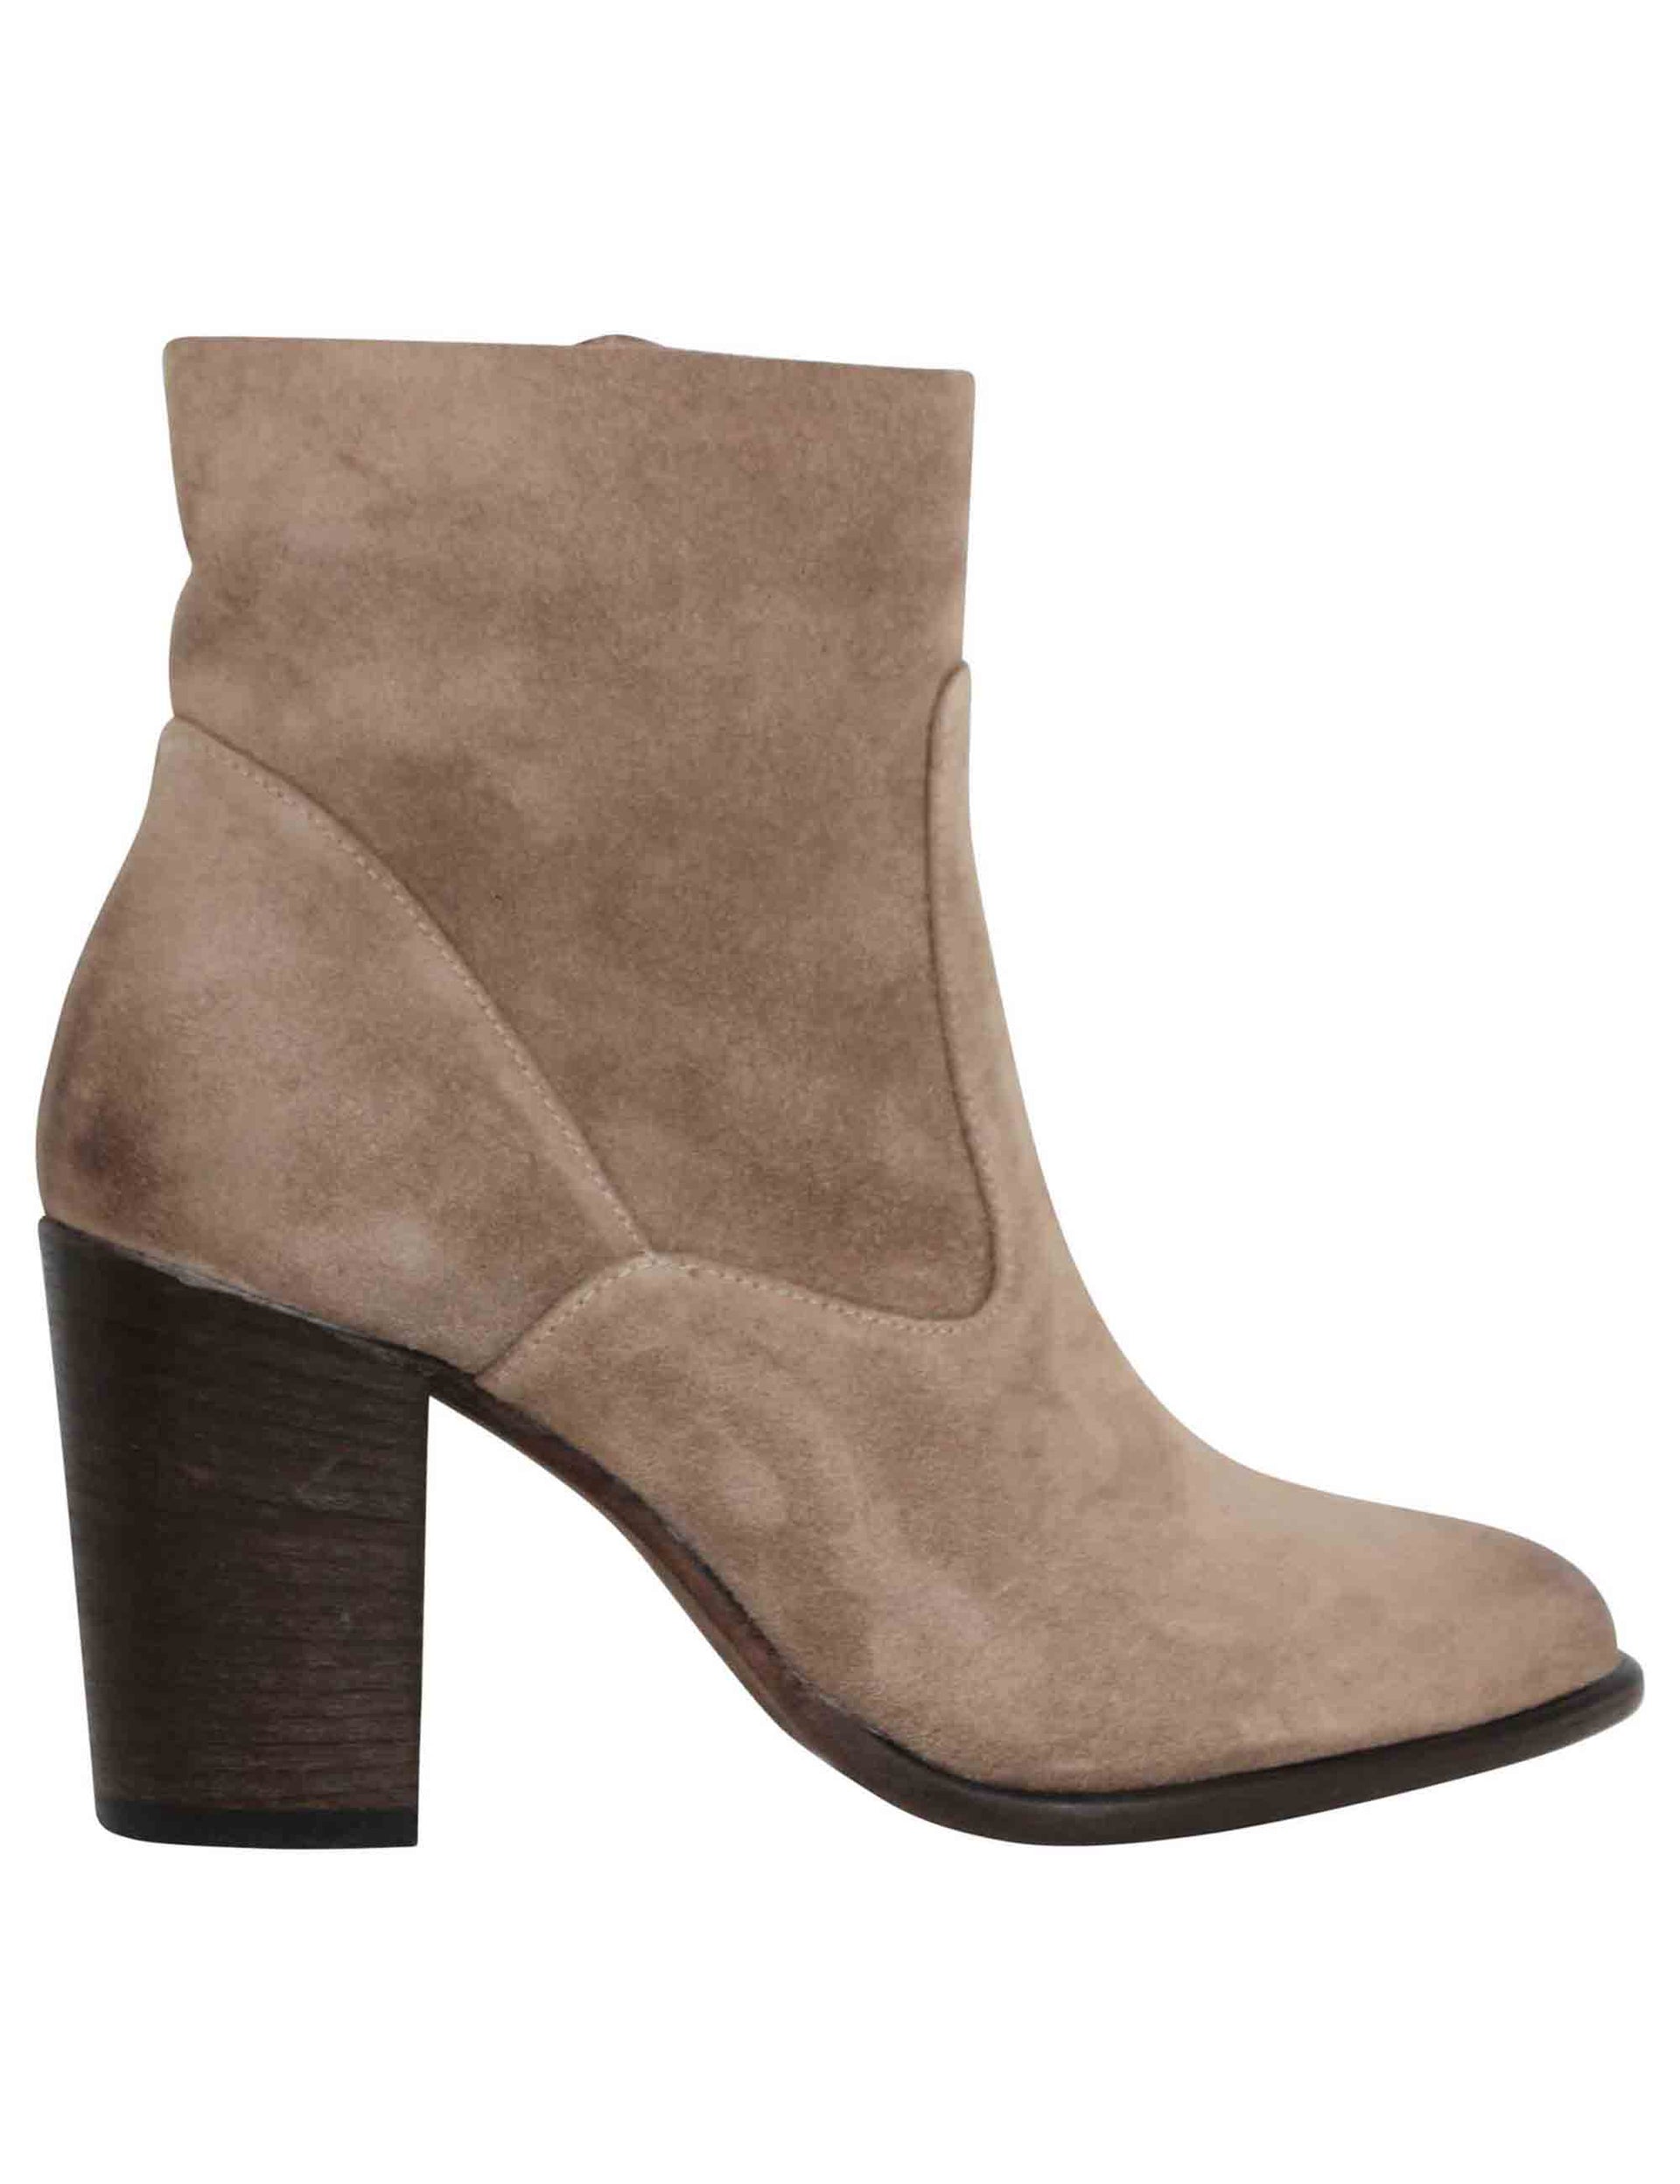 Women's taupe suede ankle boots with high leather heel